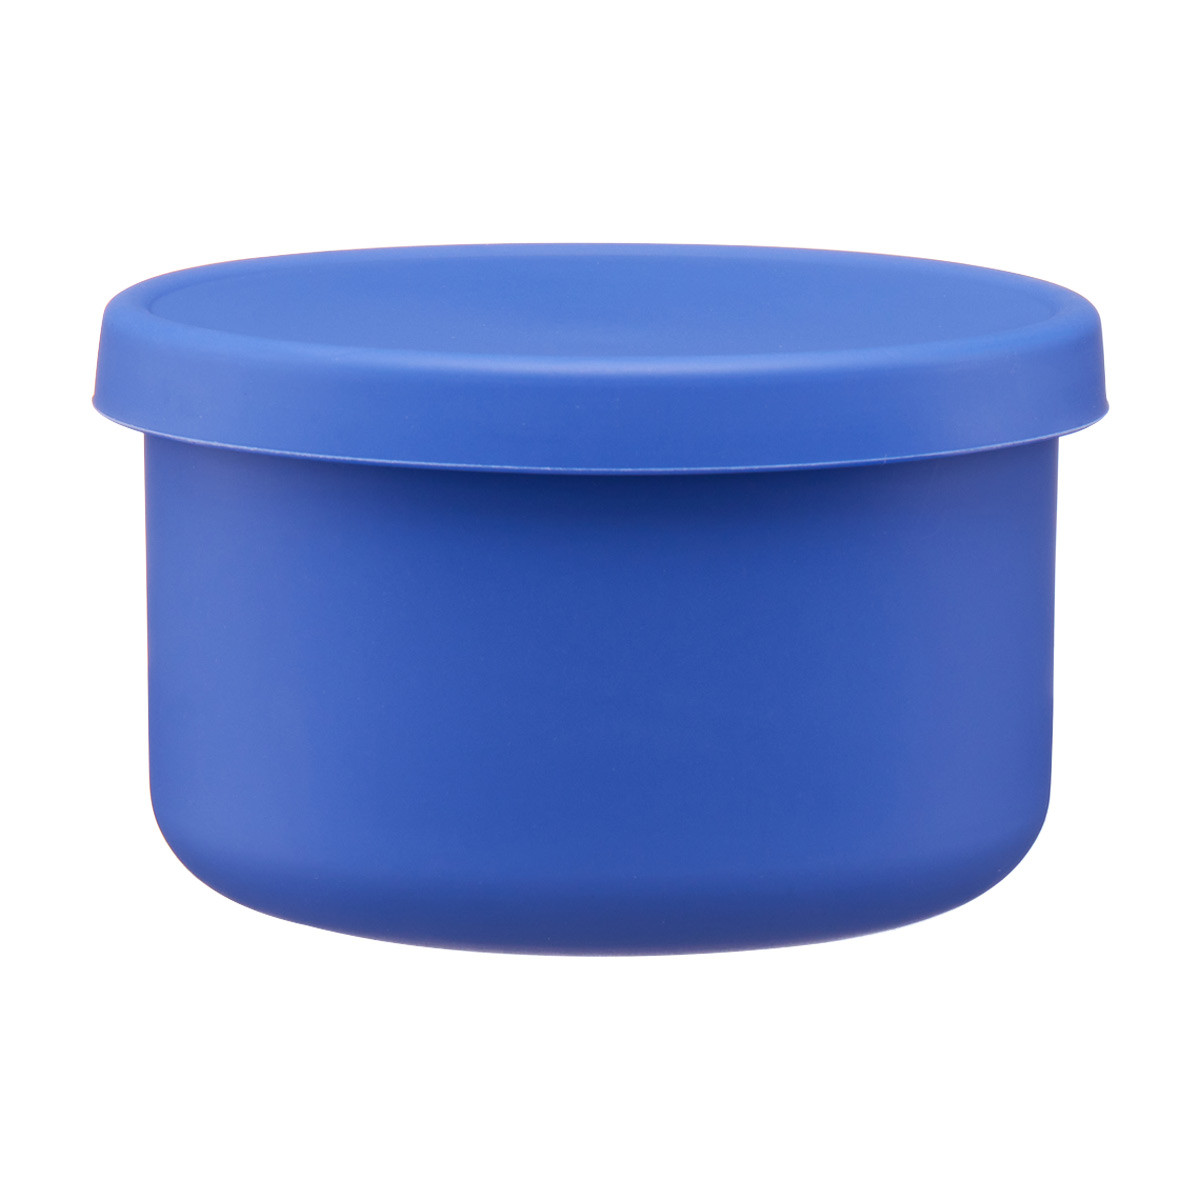 Wholesale Mr. Handy 2-Section Food Container- 20oz BLUE SILICONE LID